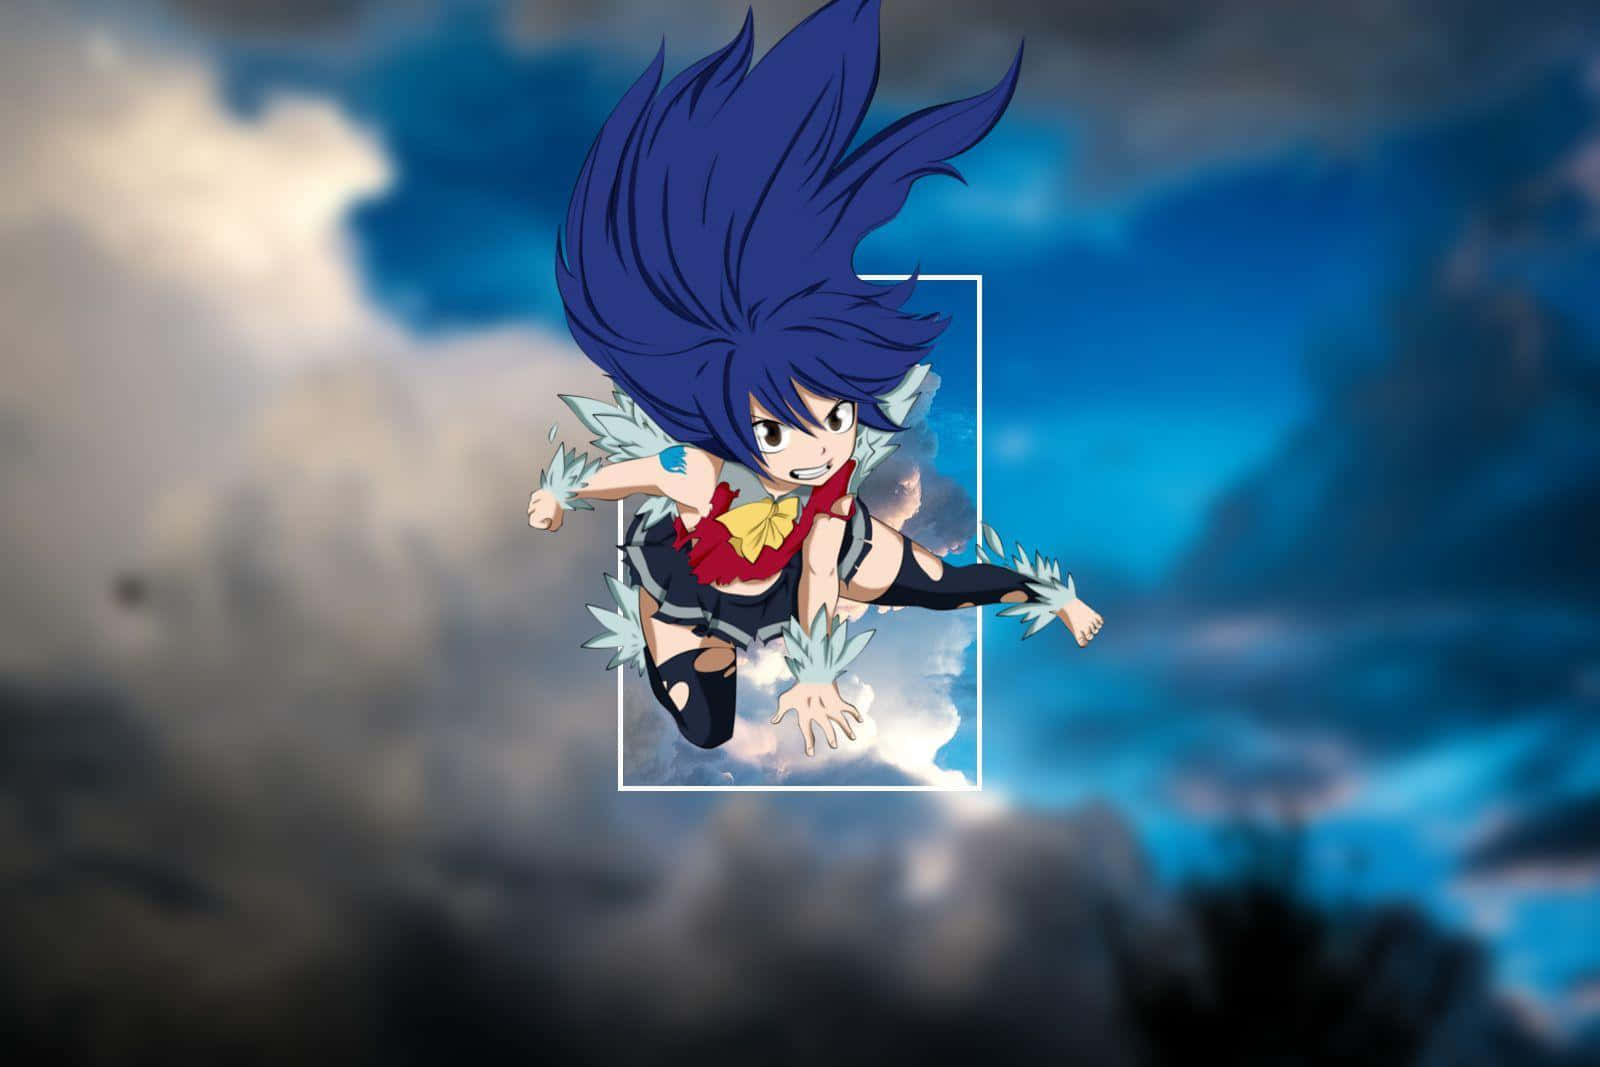 Anime character Wendy Marvell in action Wallpaper